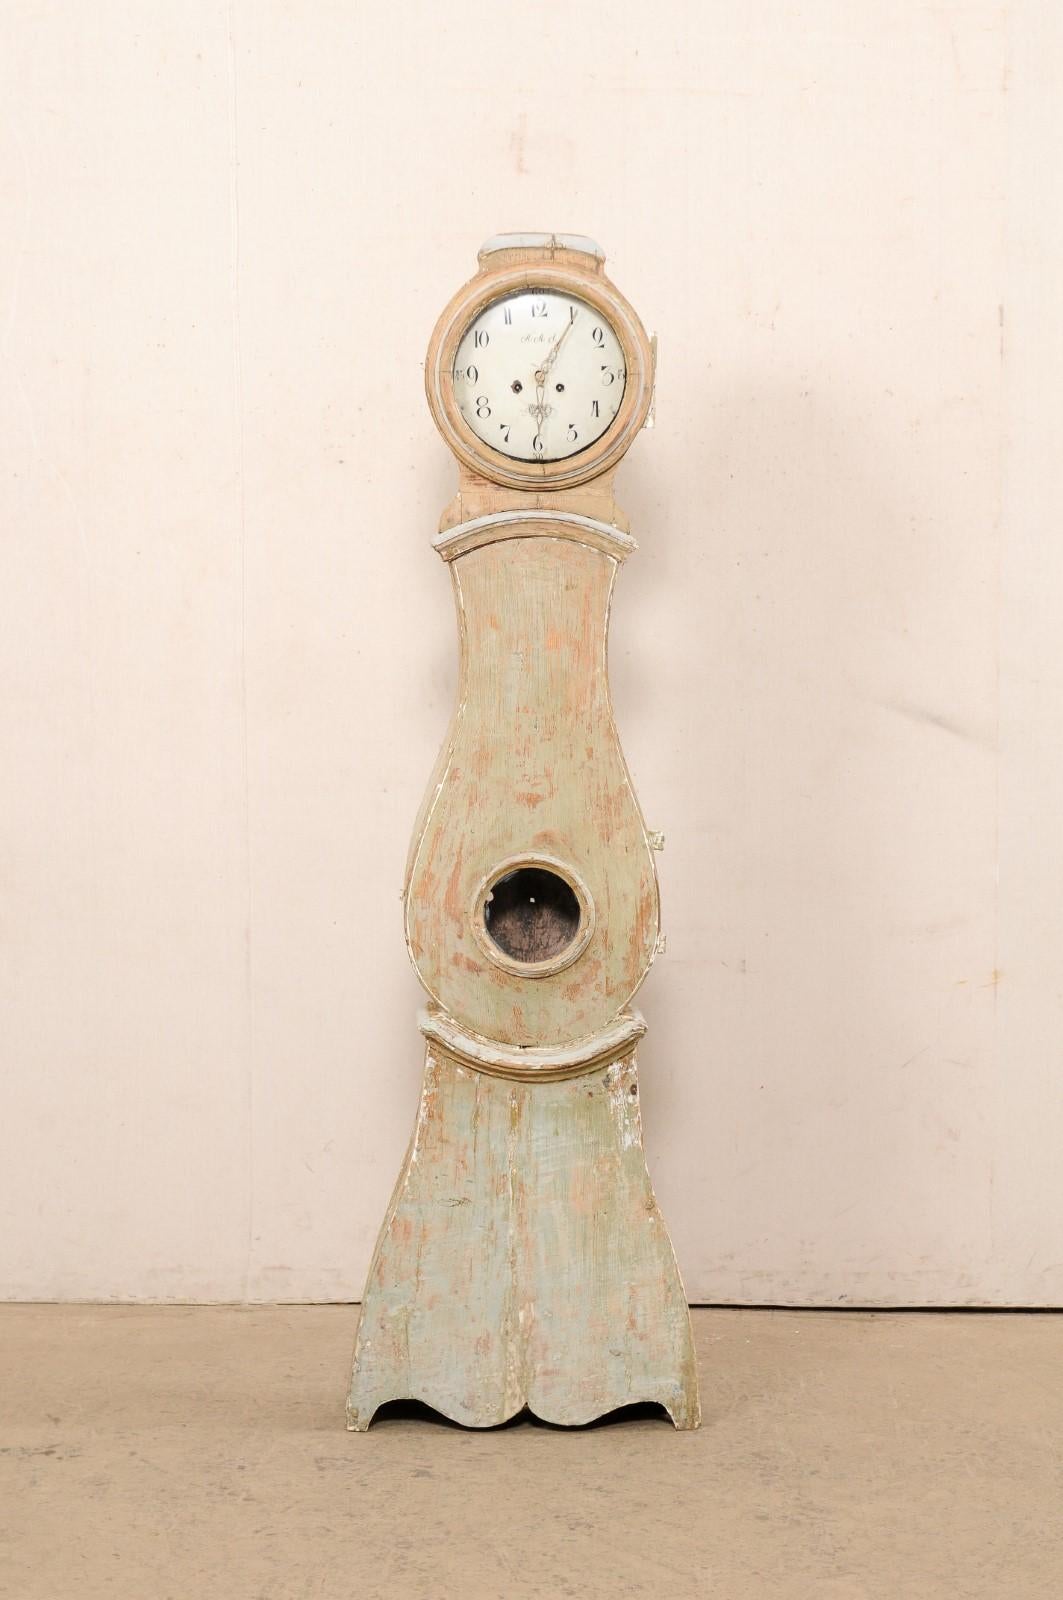 A Swedish carved wood grandfather clock from the early 19th century. This antique floor clock from Sweden features a rounded head, subtly raised crest, and beautiful raindrop shaped body. Curved molding trim accents about the neck and waist define